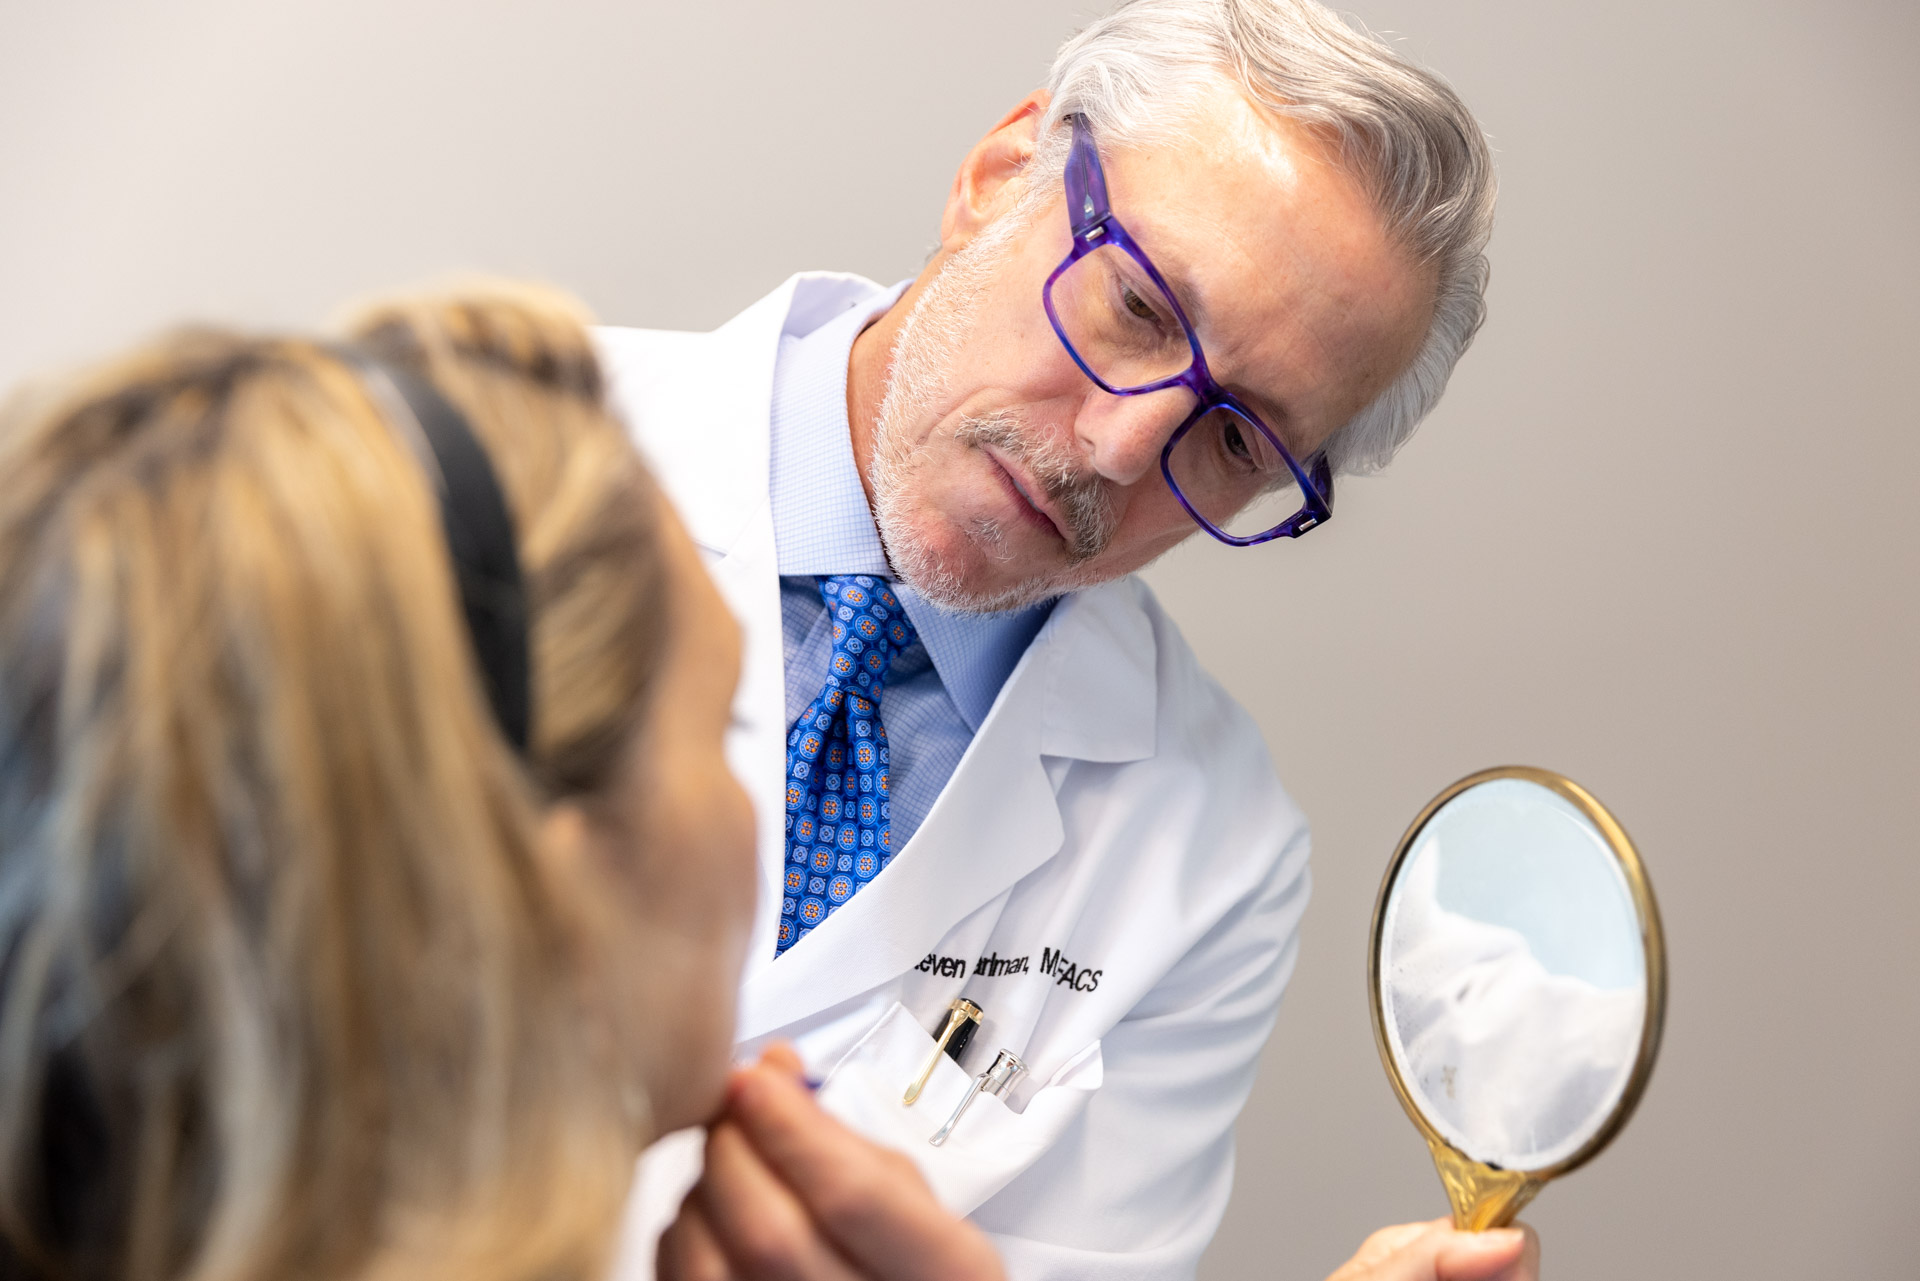 Dr. Pearlman looking at woman's chin with mirror